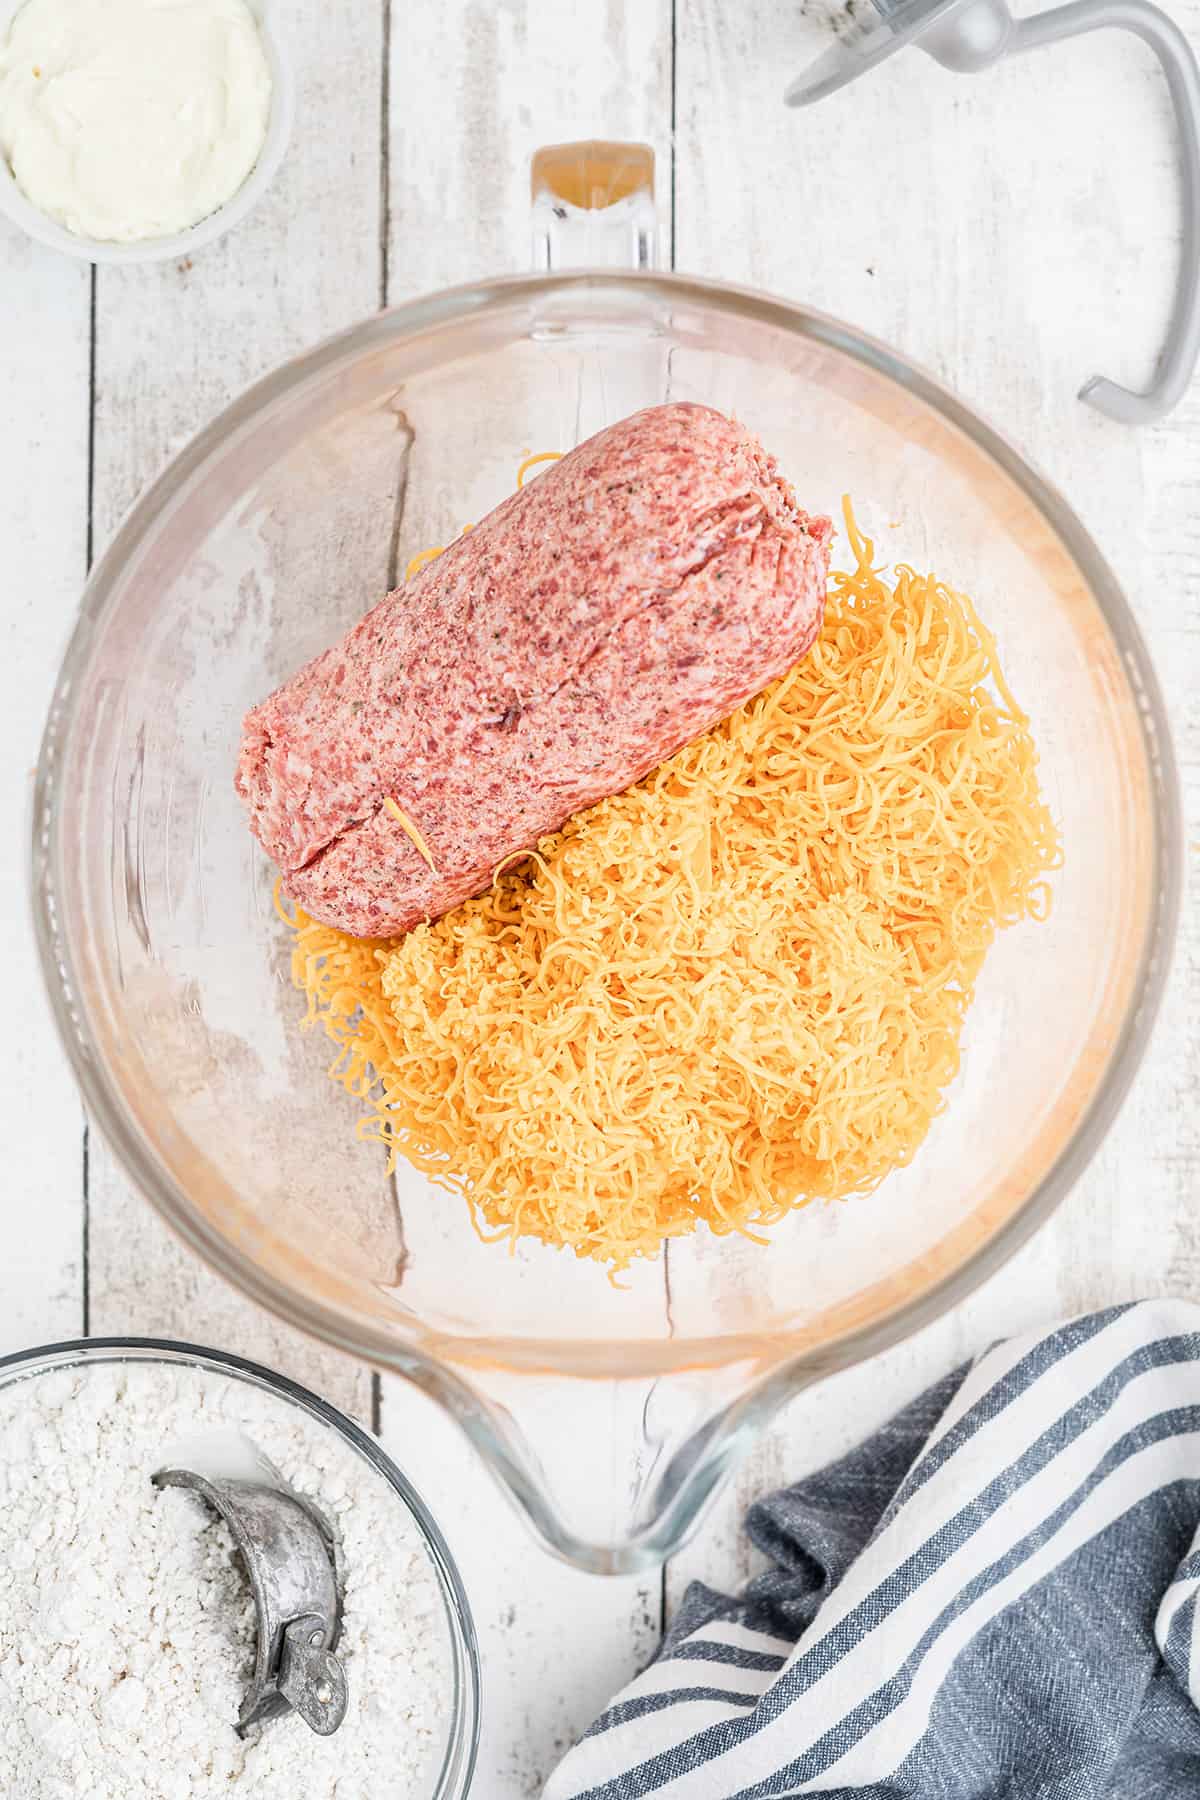 Sausage and grated cheese in a mixing bowl.